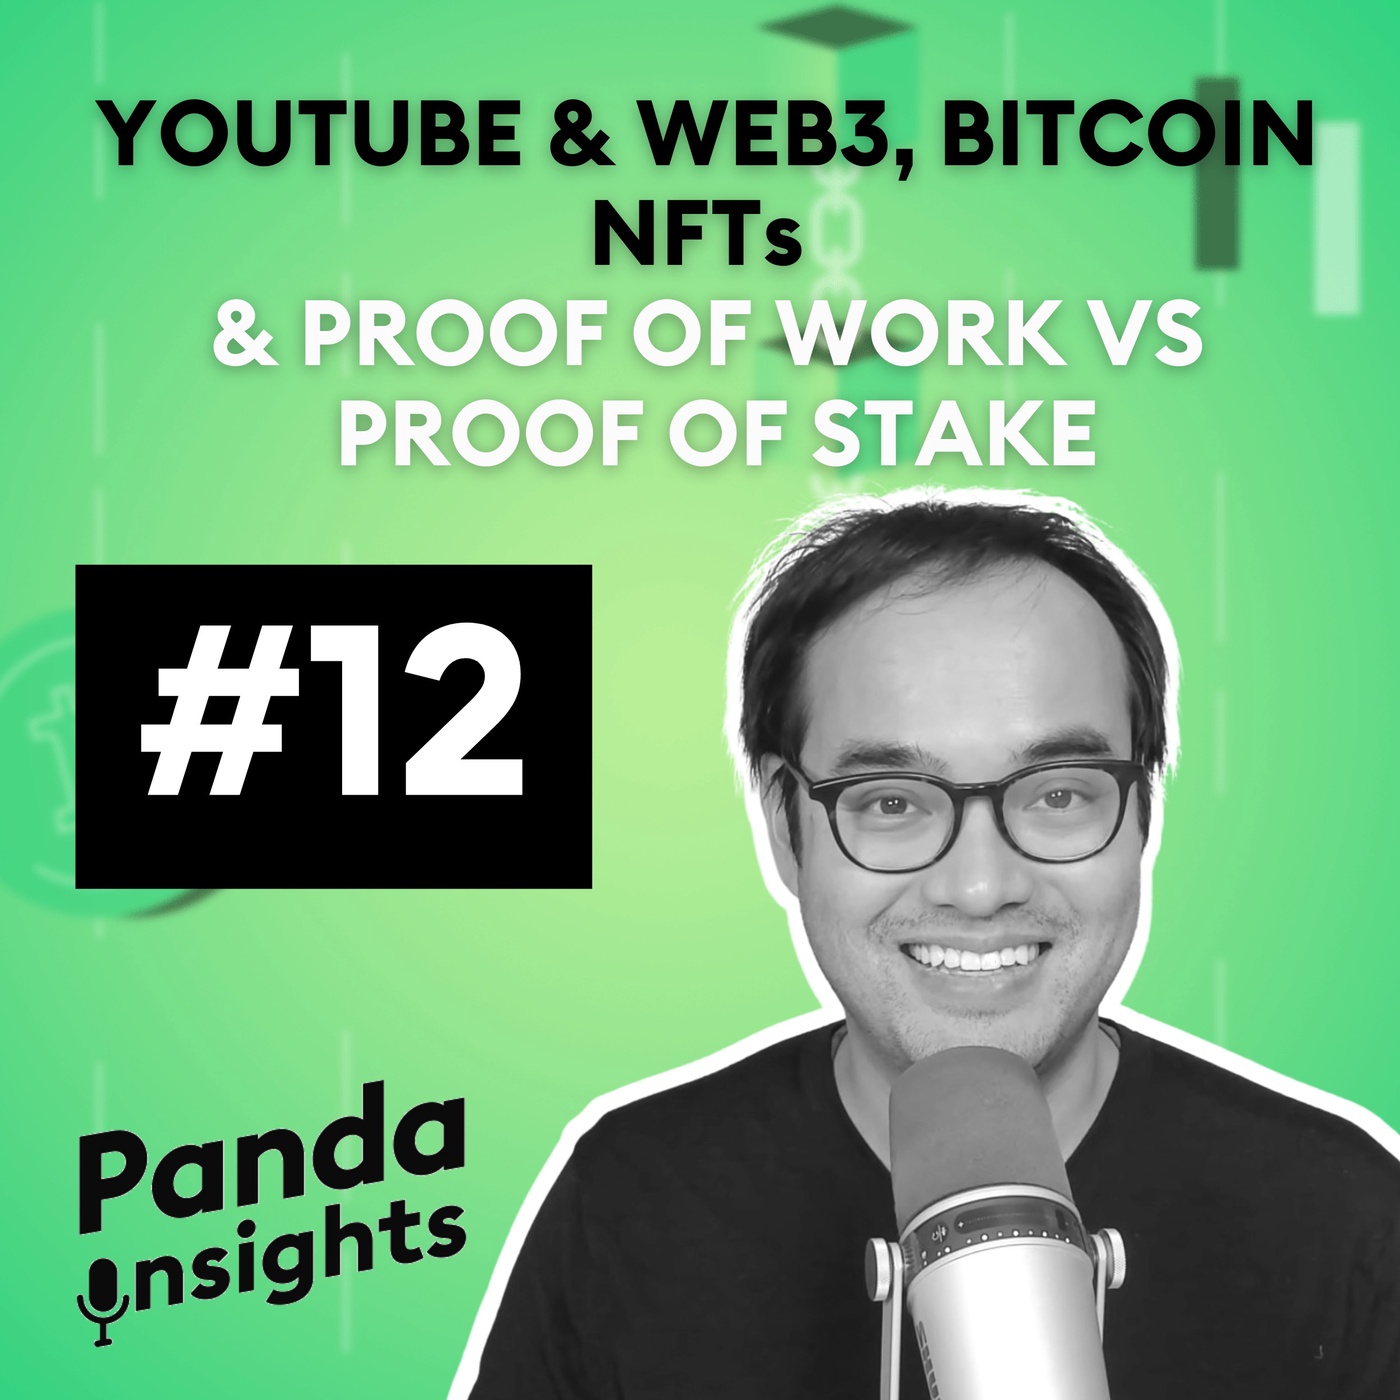 Youtube & Web3, Bitcoin NFTs und Proof of Work vs. Proof of Stake